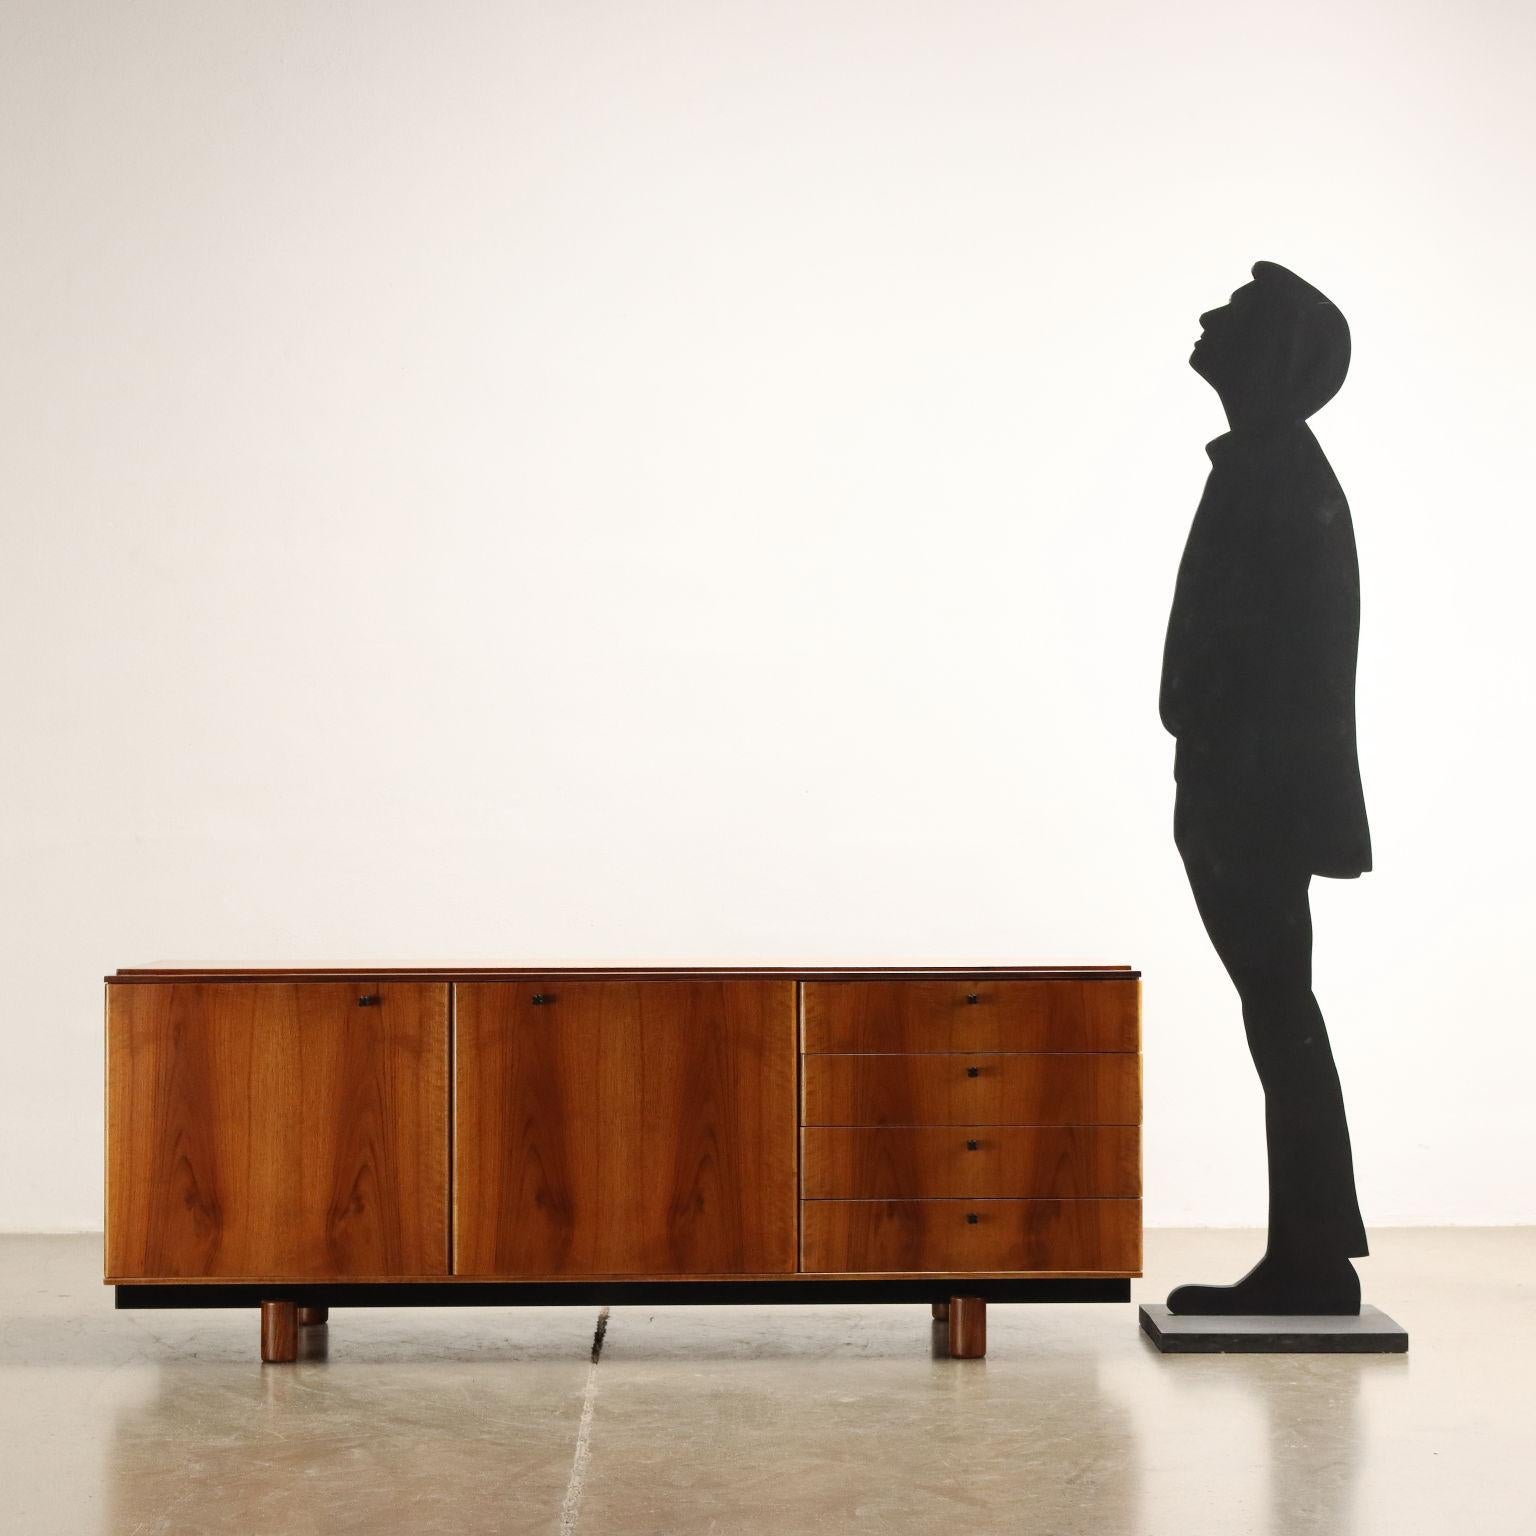 1960s walnut sideboard/Sideboard with hinged doors and drawers. Design by Gianfranco Frattini, Bernini production. Unrestored cabinet but in excellent overall condition. 